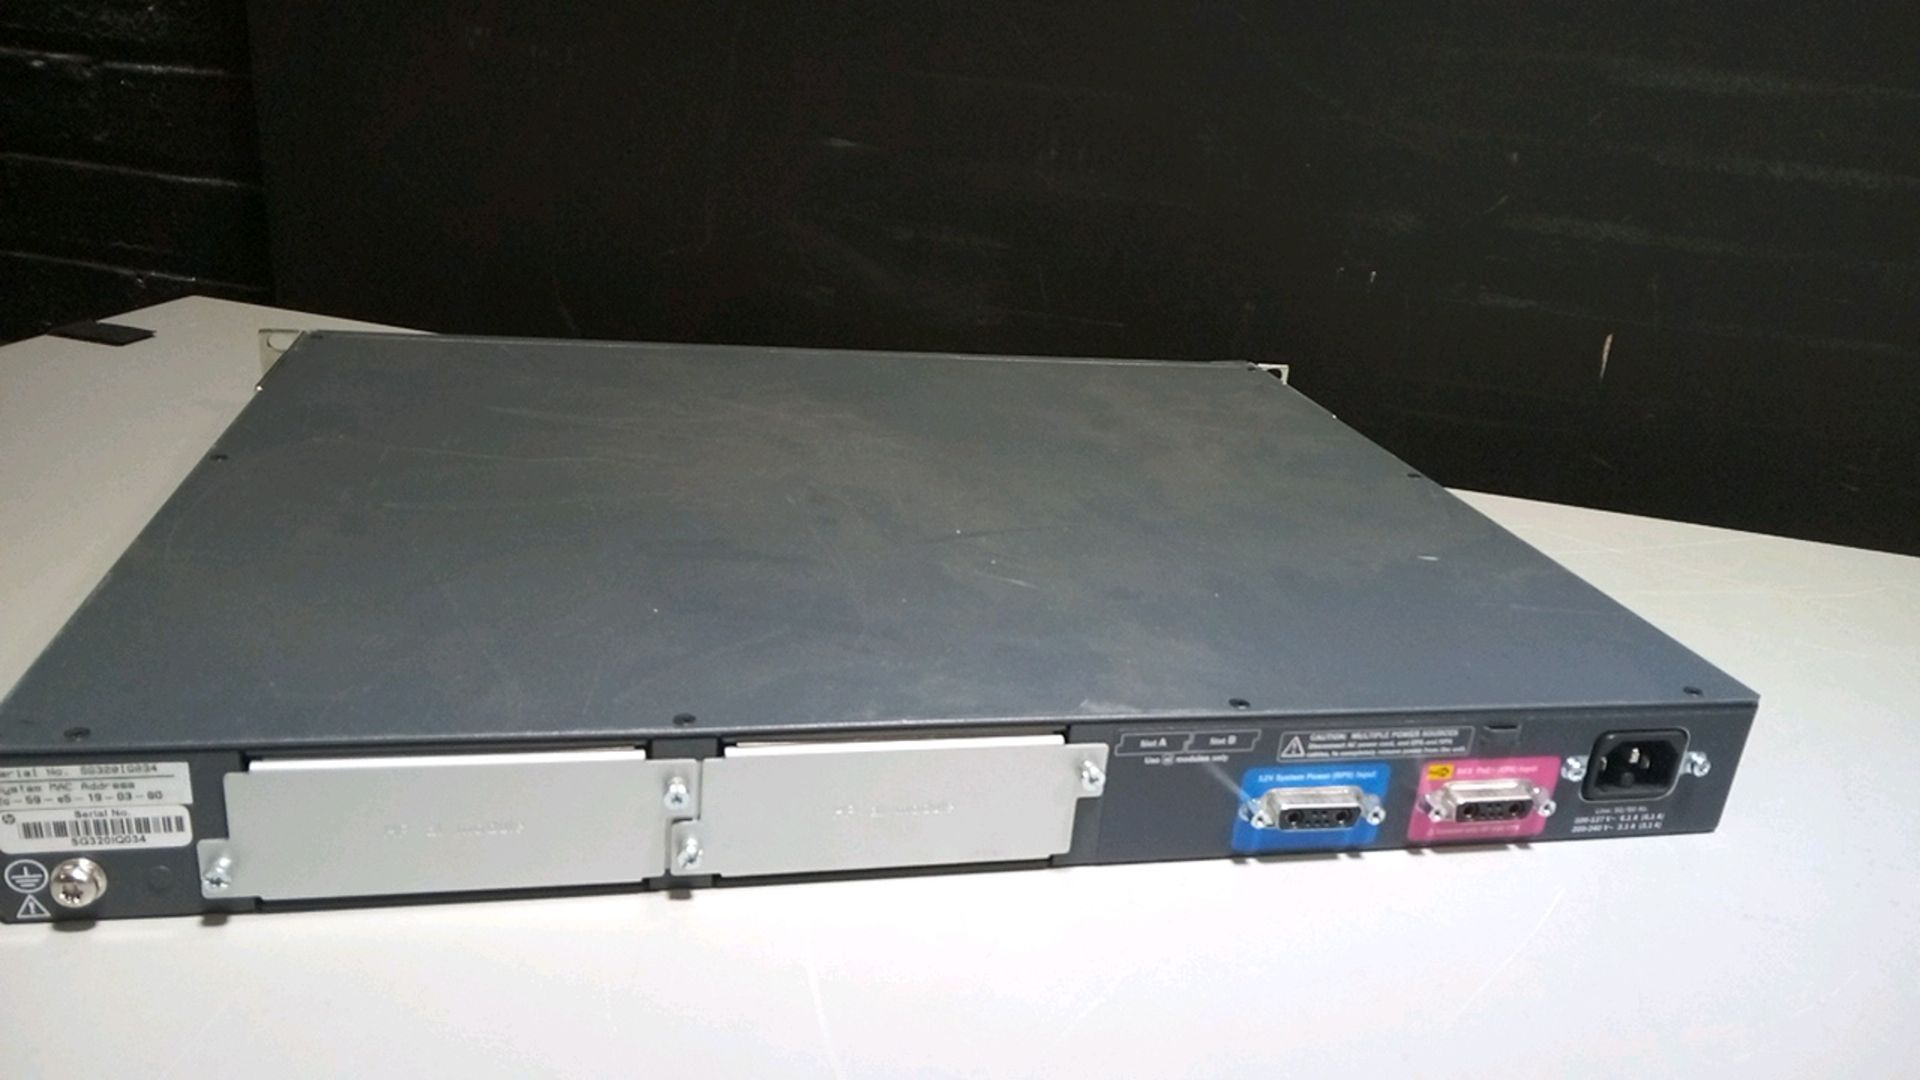 HP 2910AL-24G (J9146A) SWITCH LOCATED AT: 2440 GREENLEAF AVE, ELK GROVE VILLAGE IL - Image 2 of 3